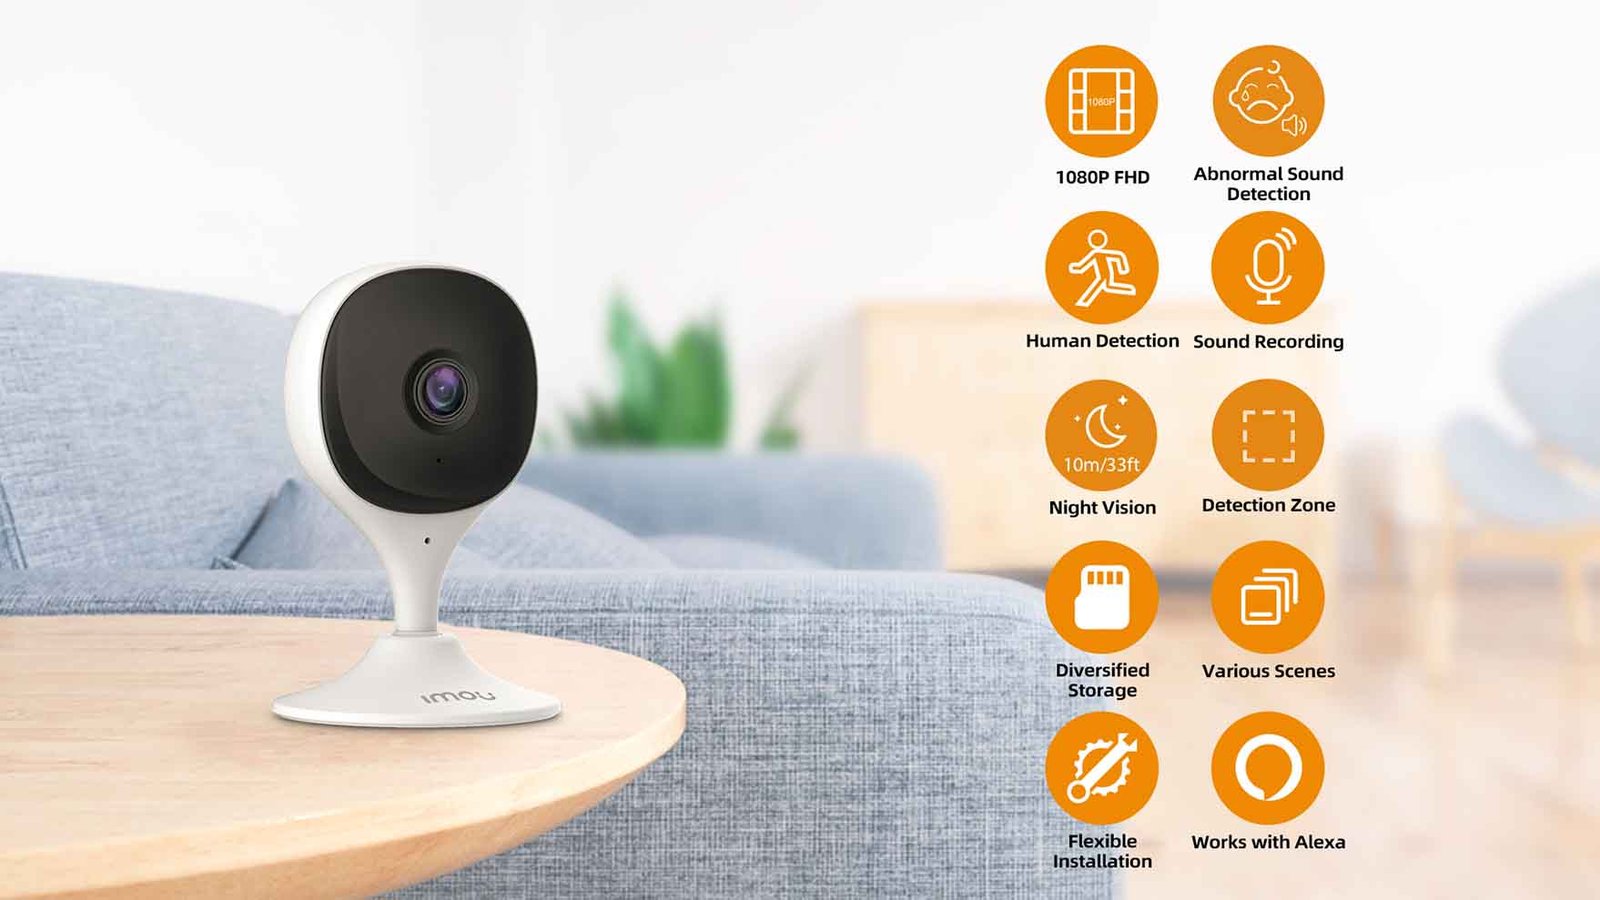 IMOU Cue 2c 1080P Security Action Indoor Camera Baby Monitor Night Vision Device Video Mini Surveillance Wifi Ip Camera